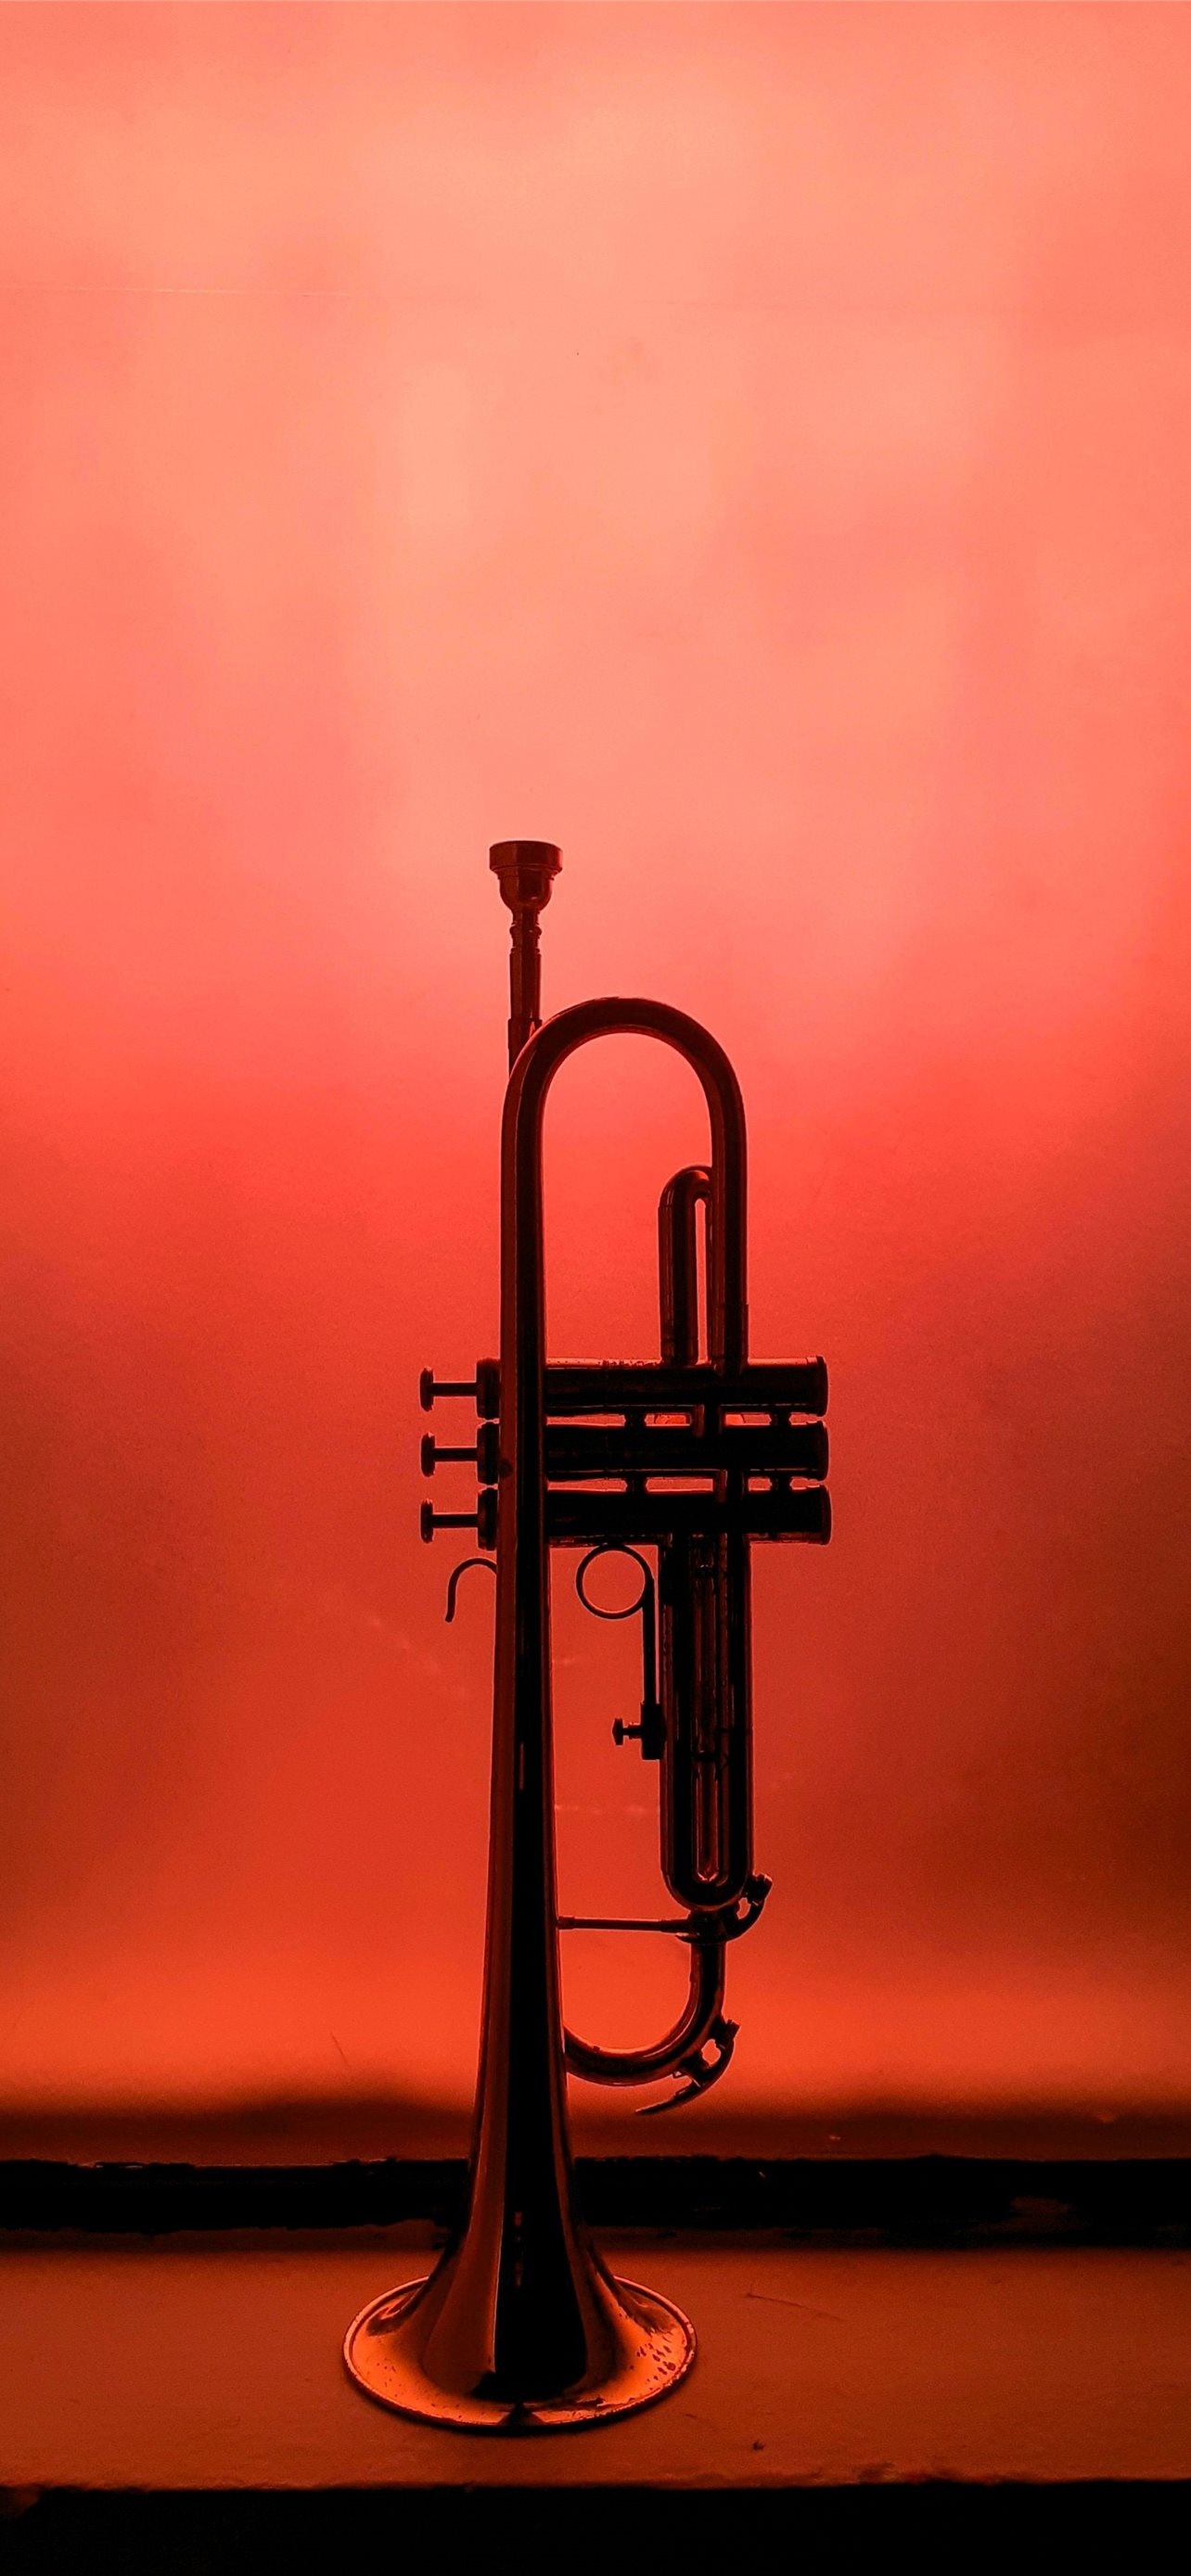 Trumpet: Valved aerophone sounded by lip movement, The strongest of all orchestral instruments. 1290x2780 HD Background.